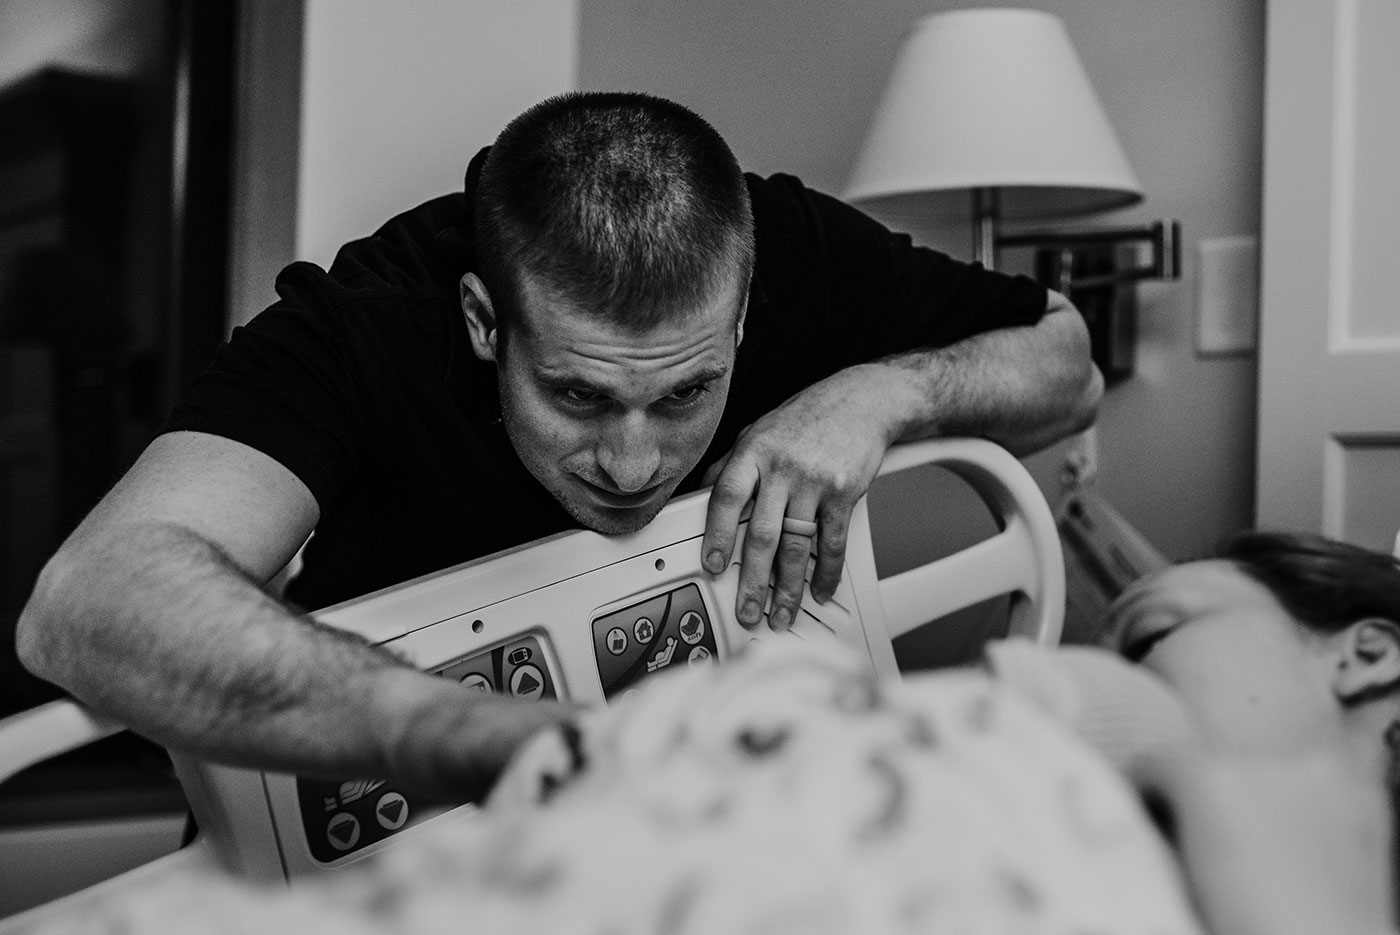 dad looks lovingly at his baby just born laying on mom's chest in hospital bed